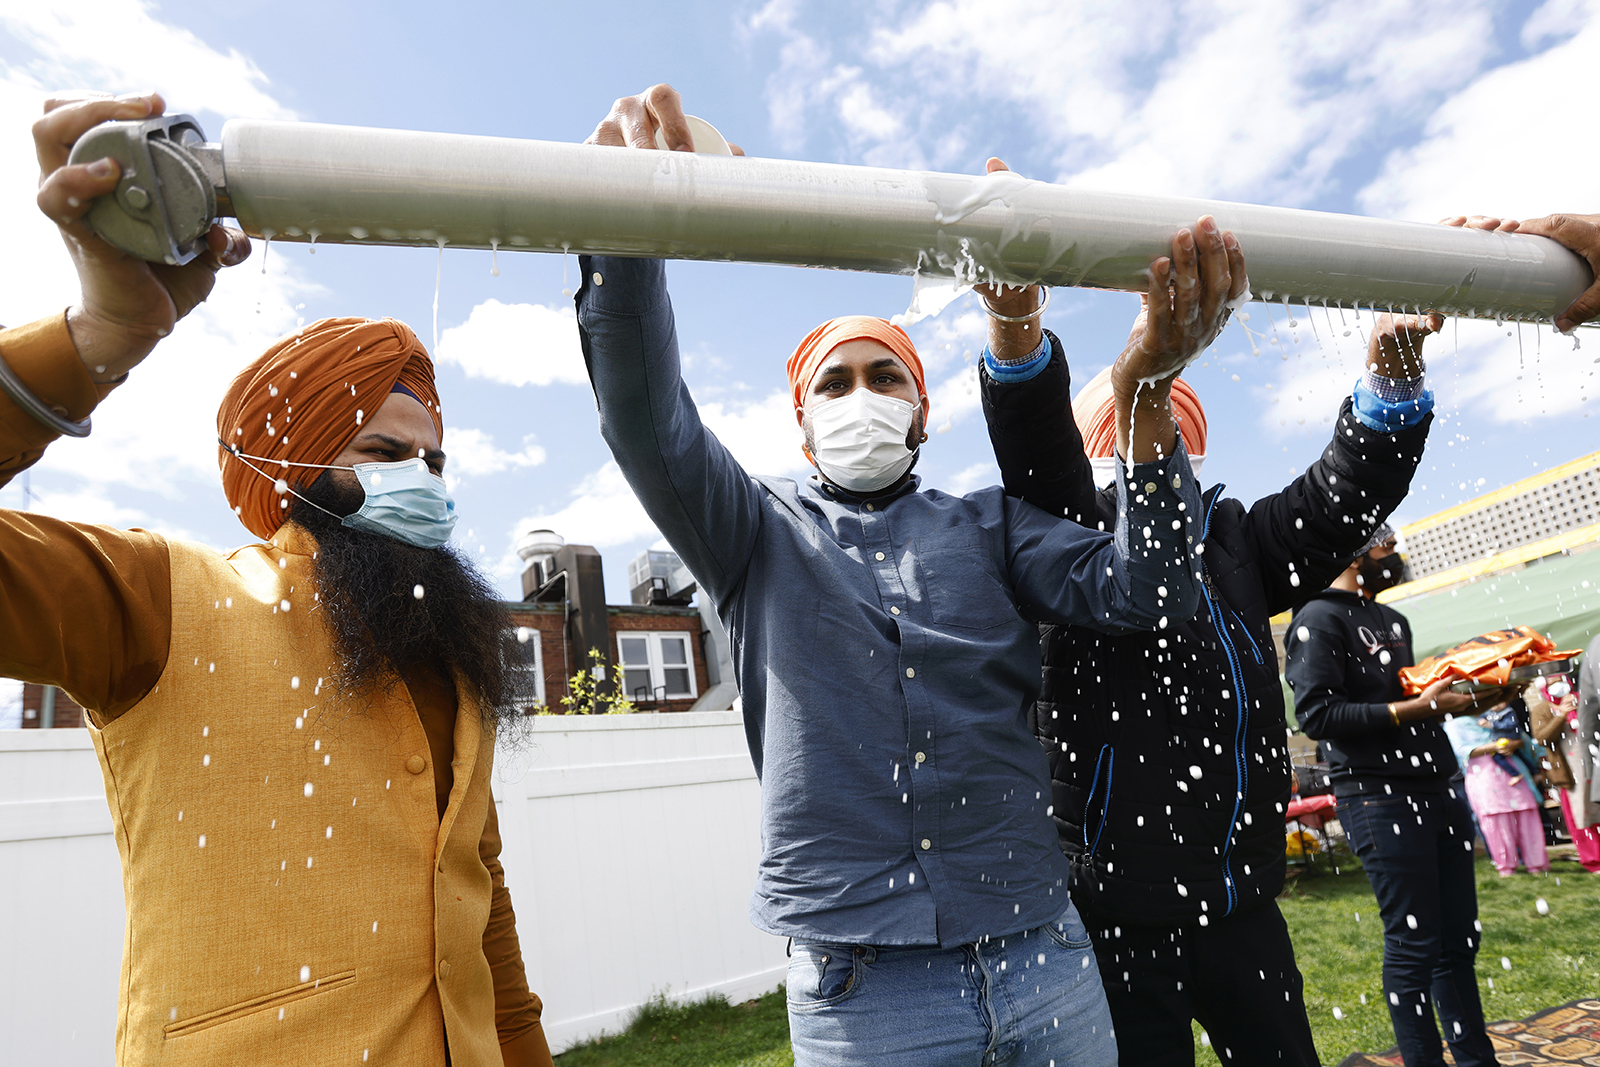 FILE - Jasbir Singh, left, and Vijay Singh wash a flagpole with milk as part of a ceremonial changing of the Sikh flag during Vaisakhi celebrations at Guru Nanak Darbar of Long Island, Tuesday, April 13, 2021 in Hicksville, N.Y. In a convergence that happens only rarely, Judaism’s Passover, Christianity’s Easter and Islam’s holy month of Ramadan overlapped in April with holy days for Buddhists, Baha’is, Sikhs, Jains and Hindus, offering different faith groups a chance to share meals and rituals in a range of interfaith events. (AP Photo/Jason DeCrow, File)